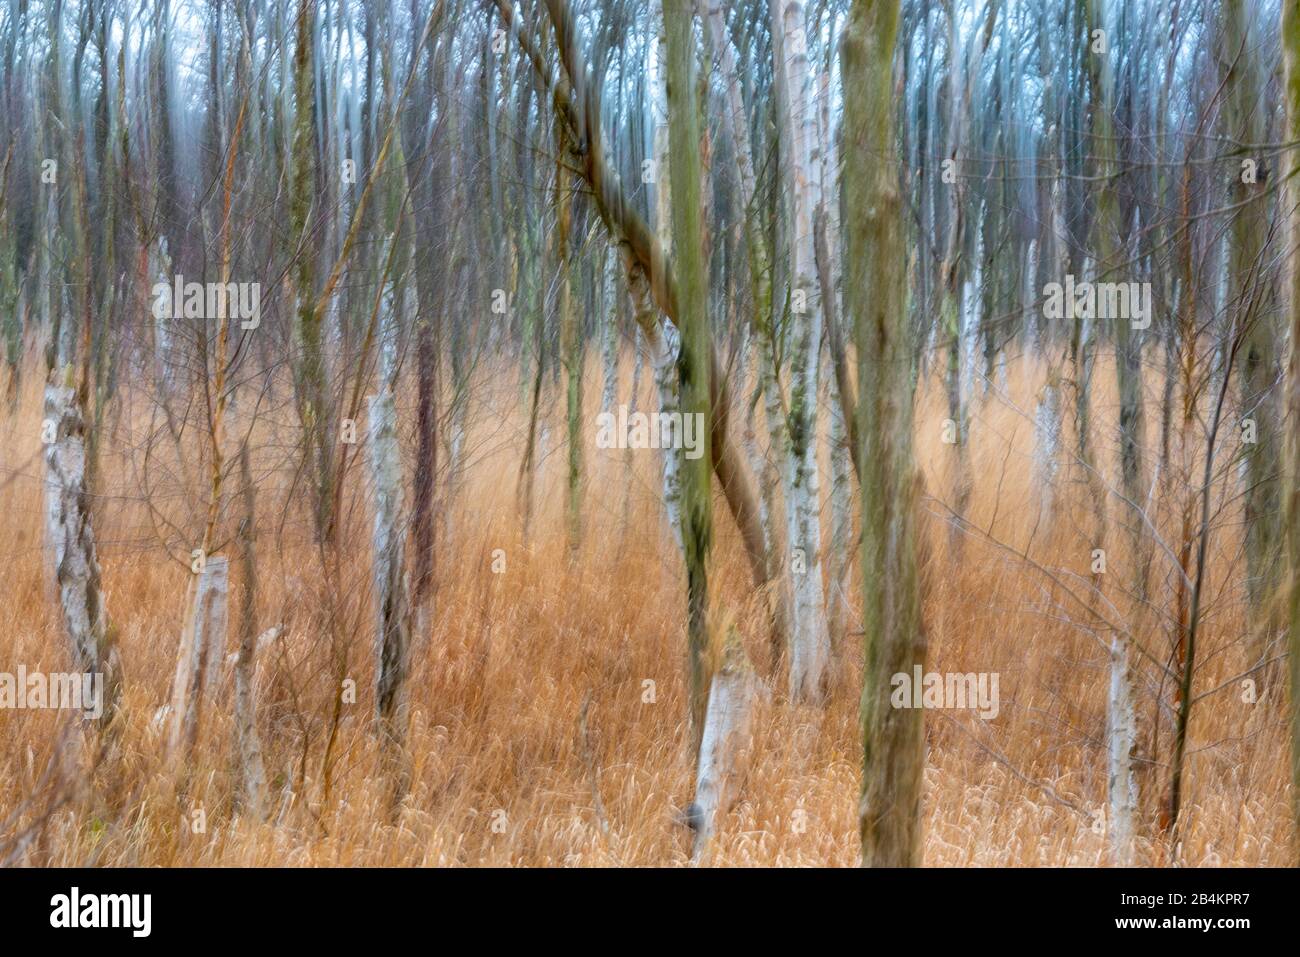 Osterwald bei Zingst, photographed blurred Stock Photo